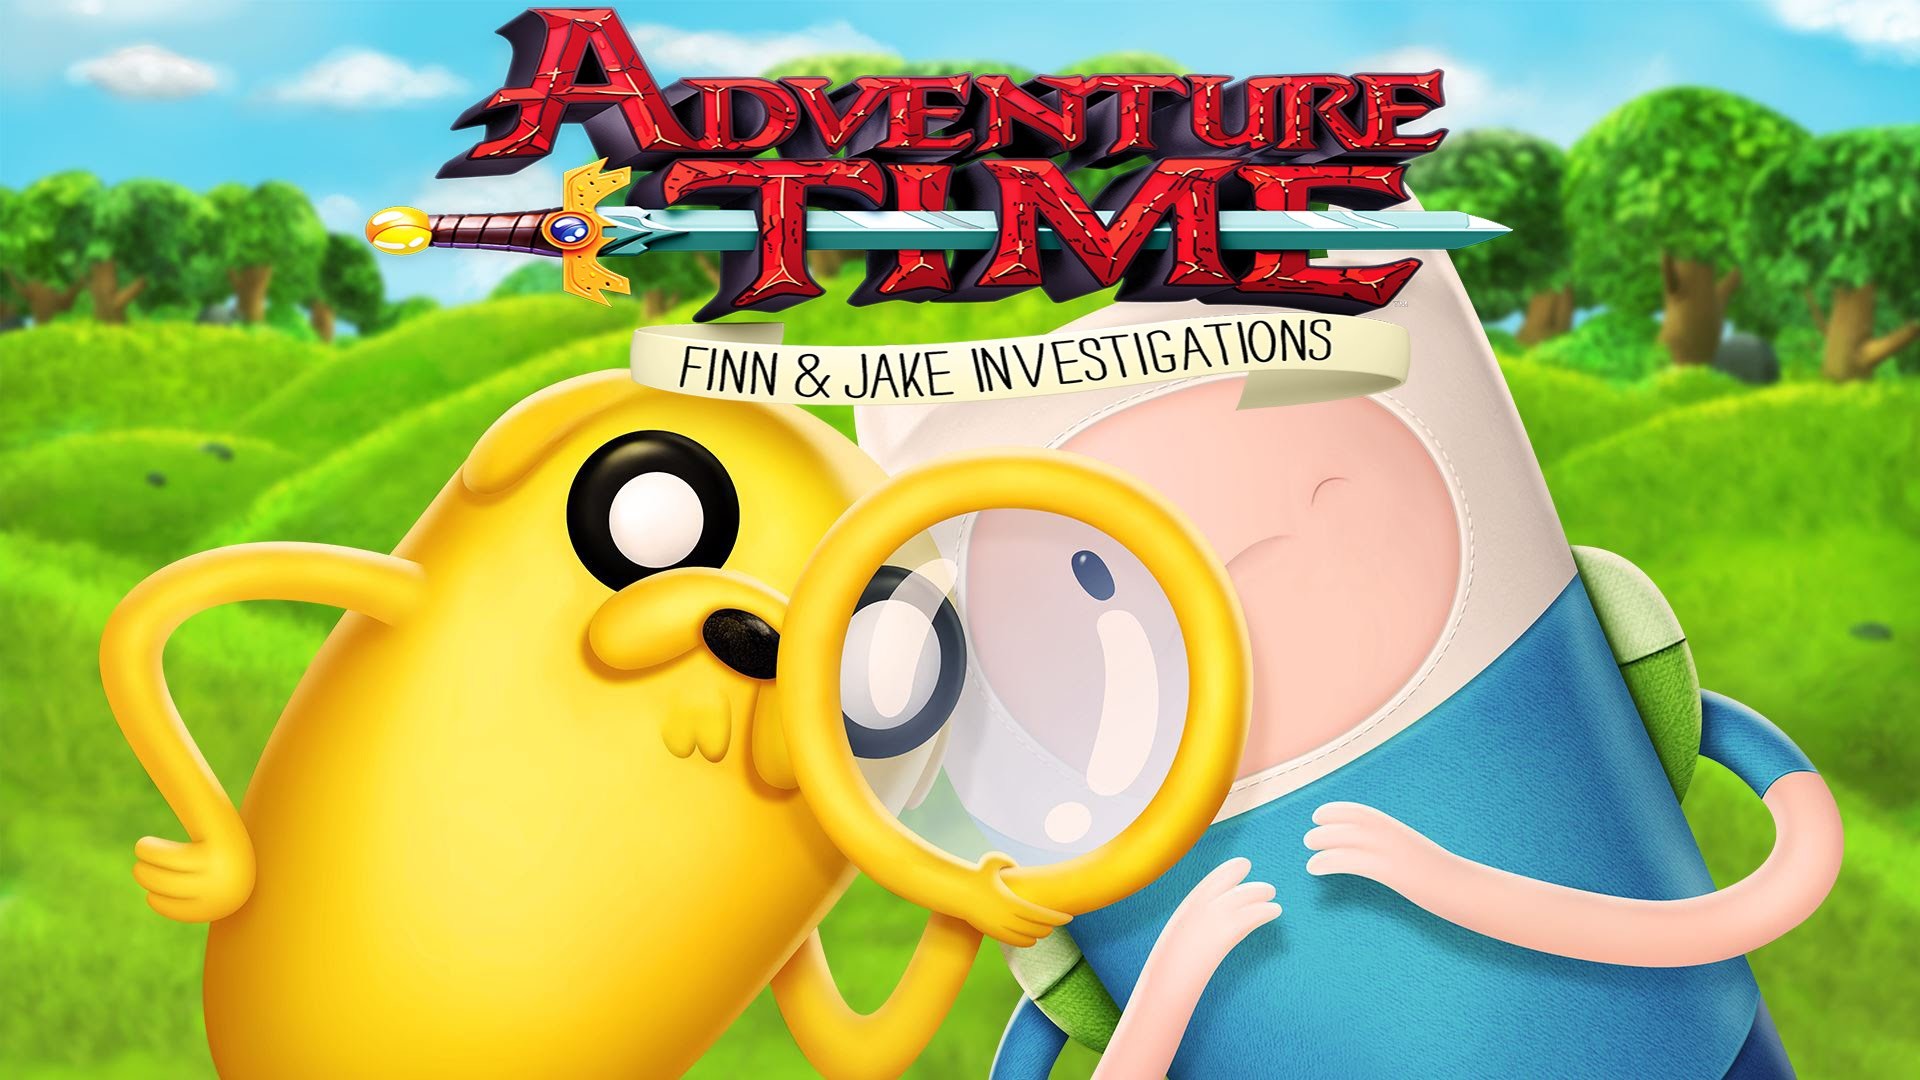 Adventure time finn and jake investigations steam фото 4